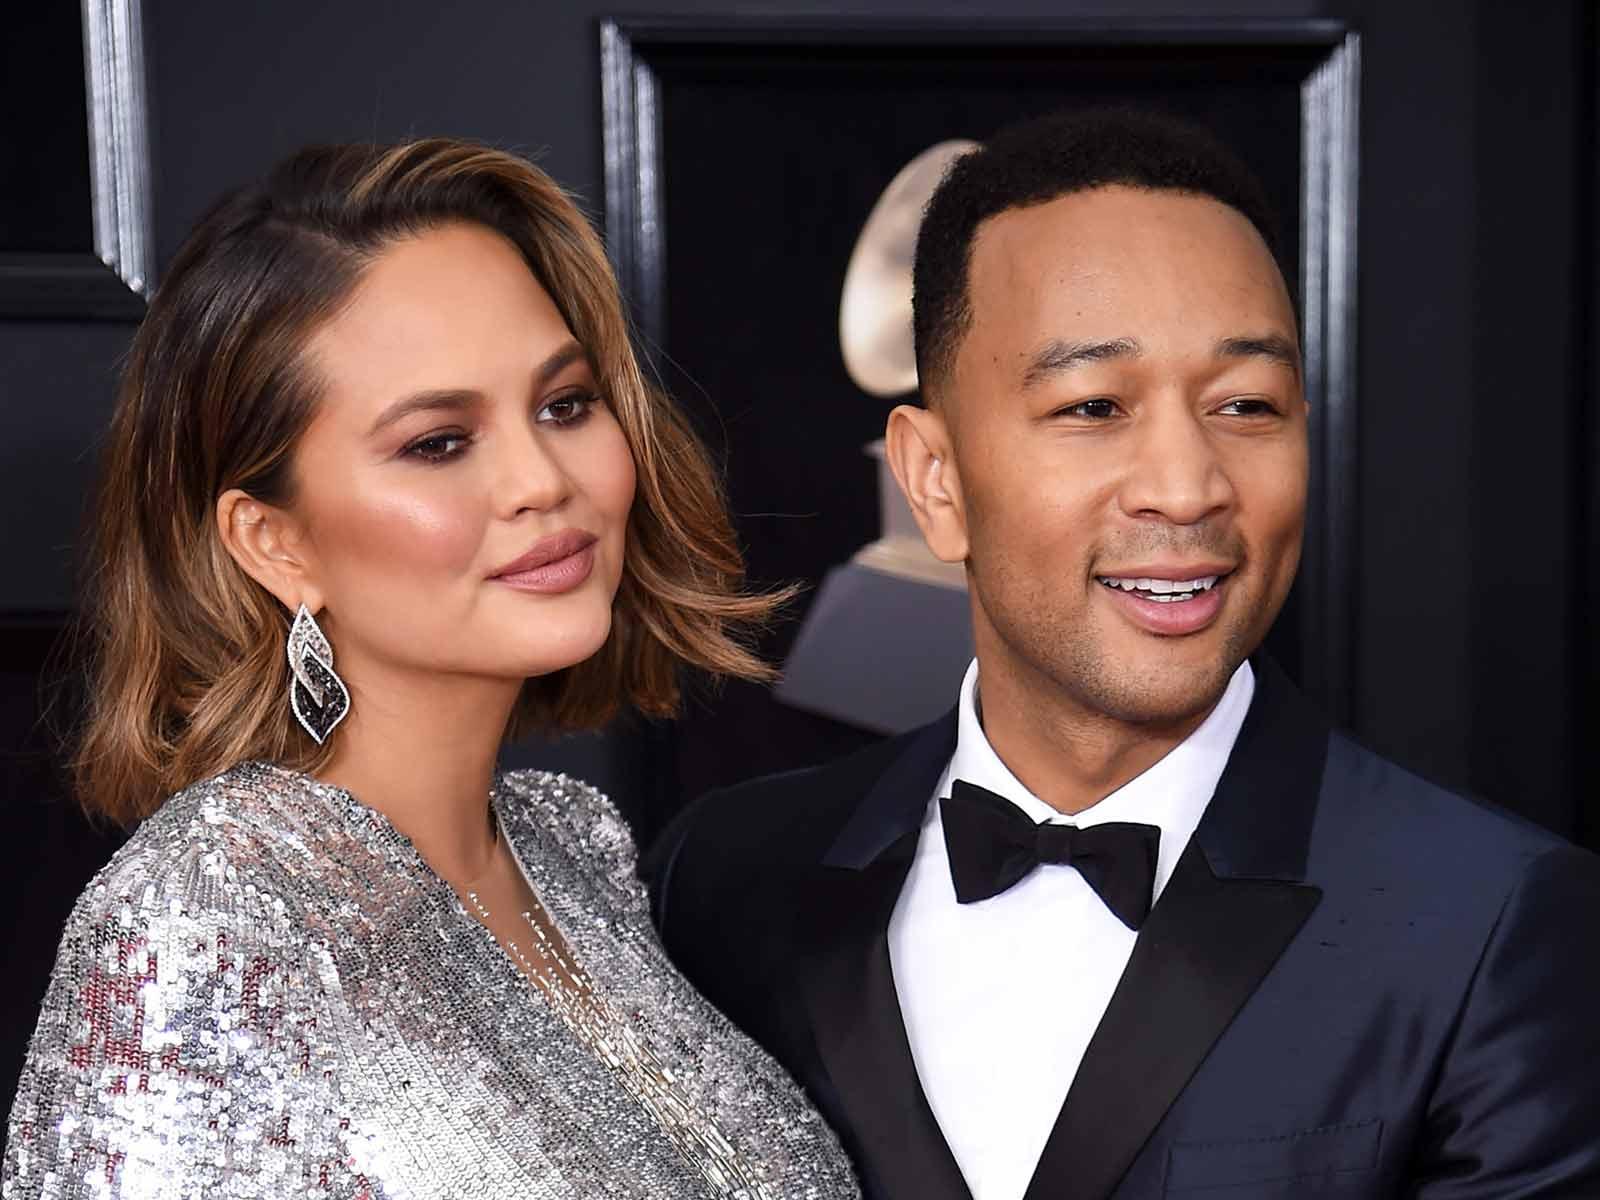 John Legend and Chrissy Teigen Donated $25,000 to Students Organizing Gun March